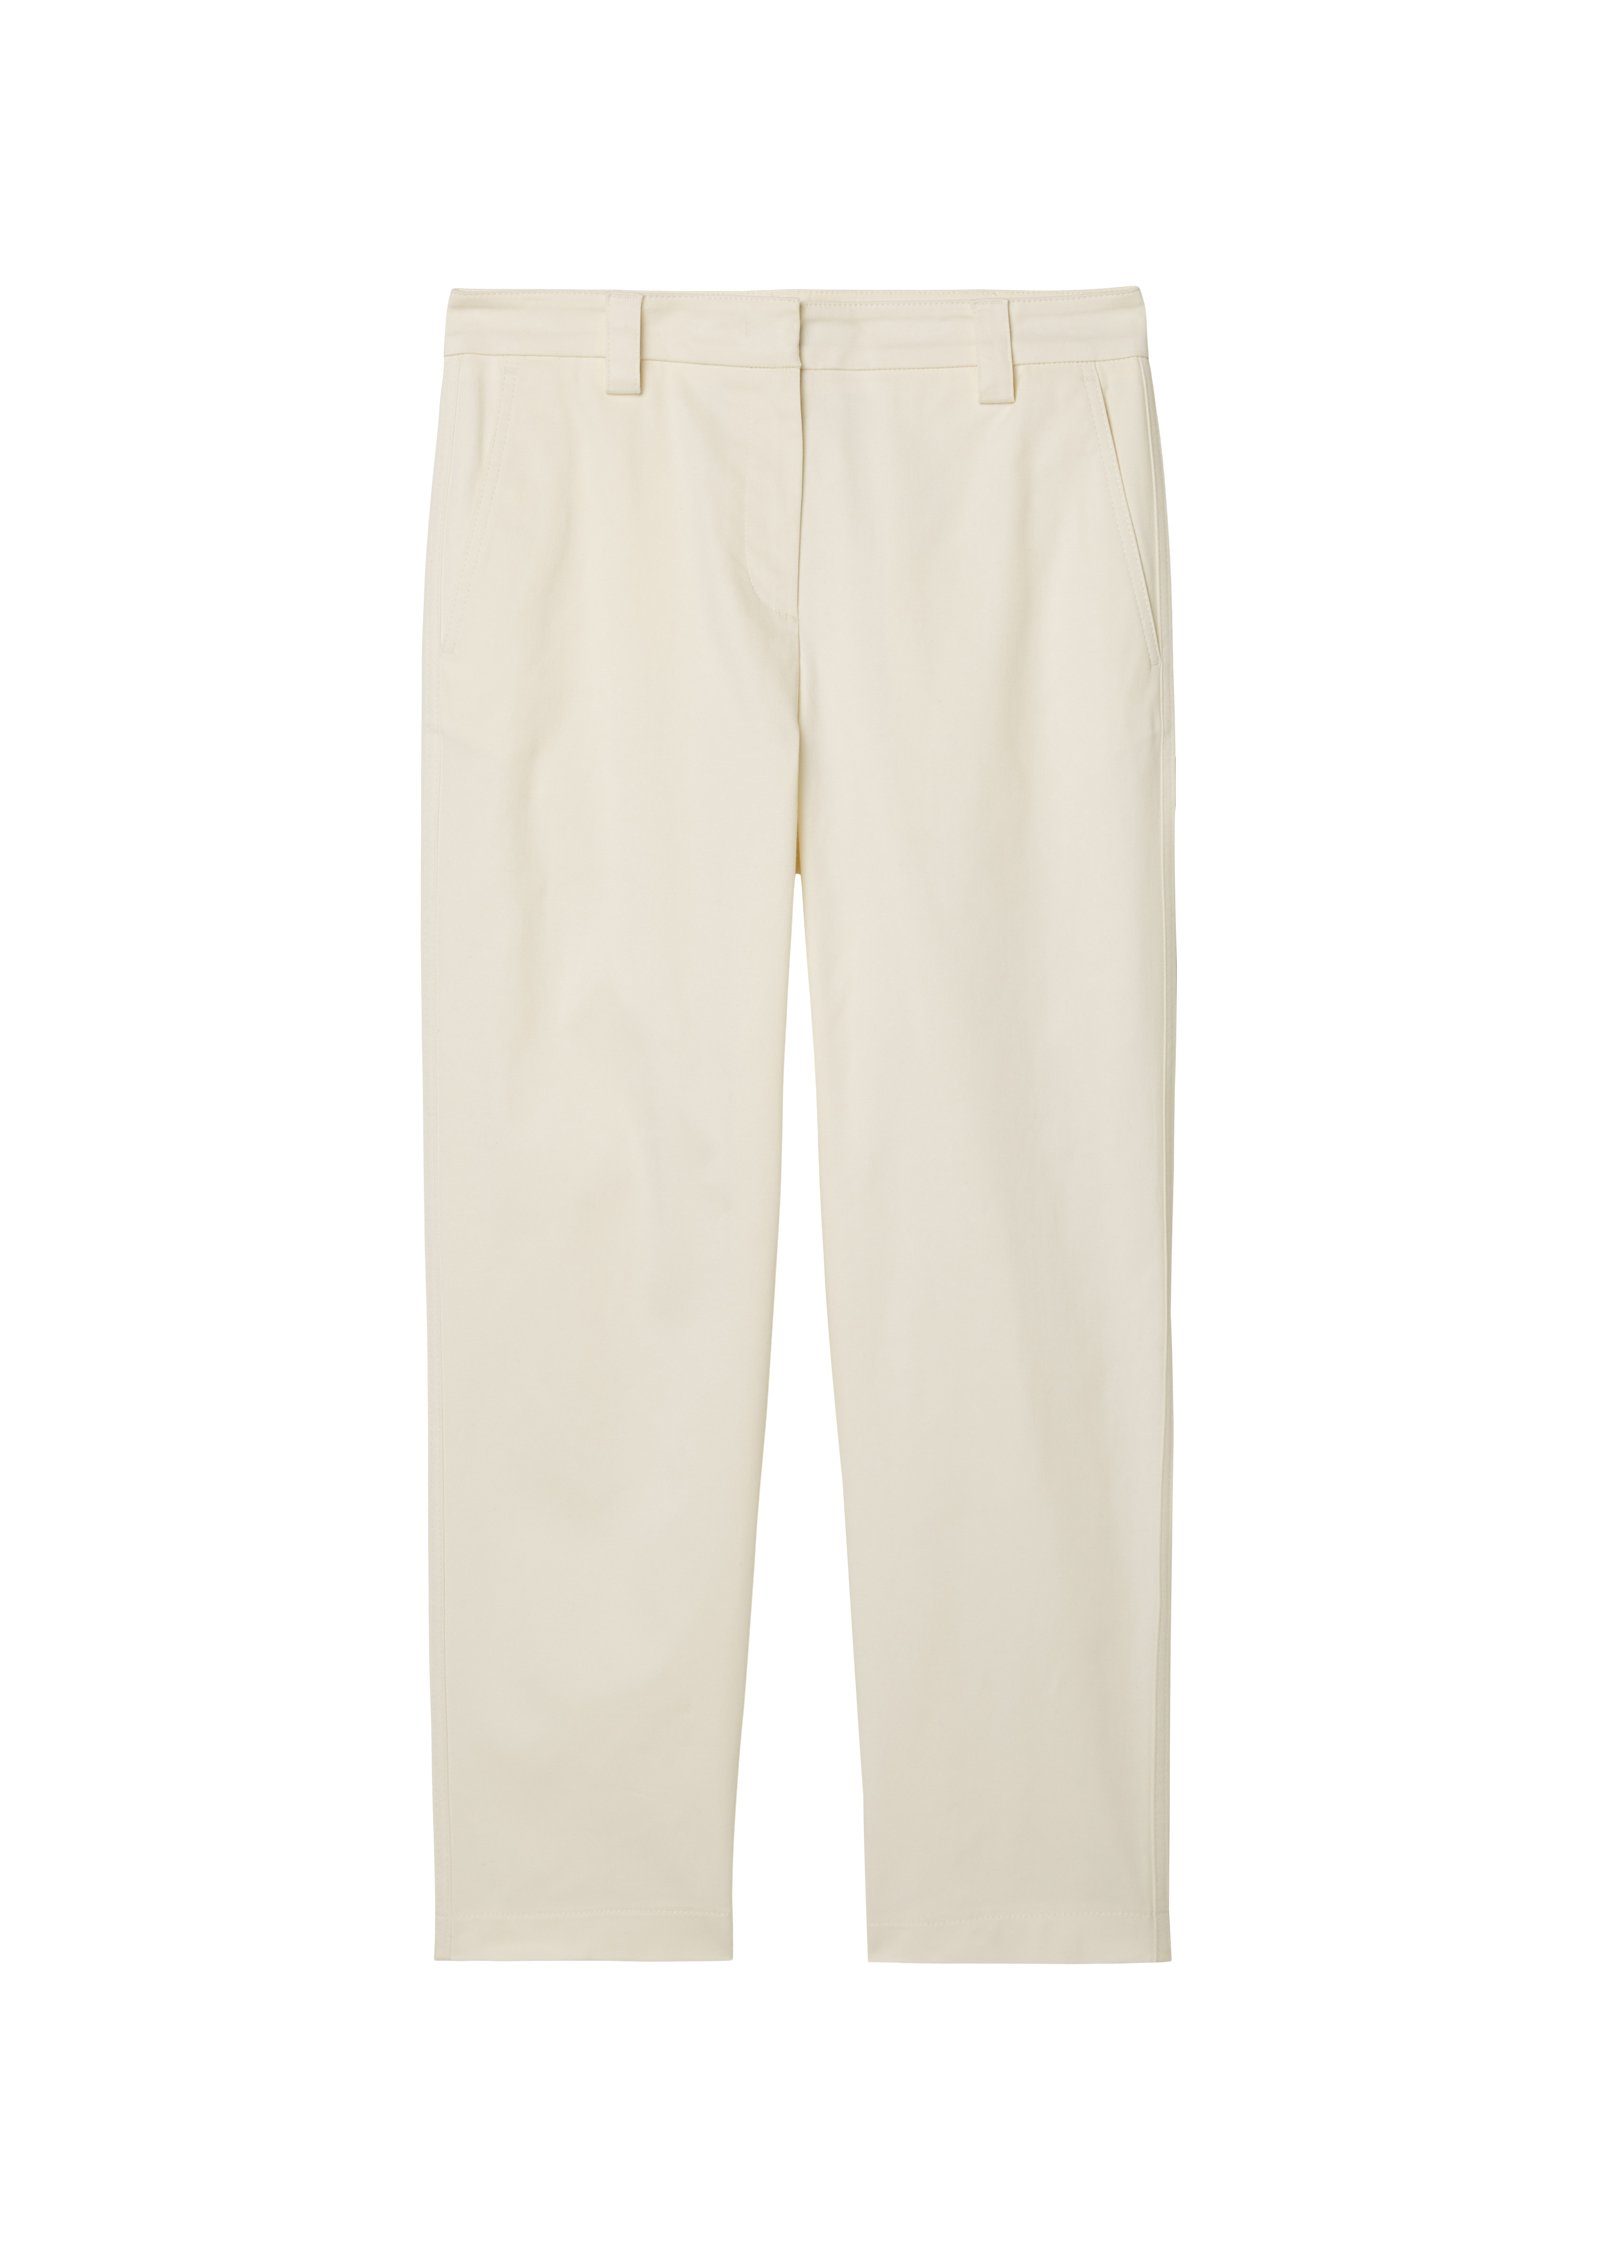 modern Marc chalky Pants, pocket Chino-Style welt style, im rise, O'Polo sand modernen chino 7/8-Hose high tapered leg,